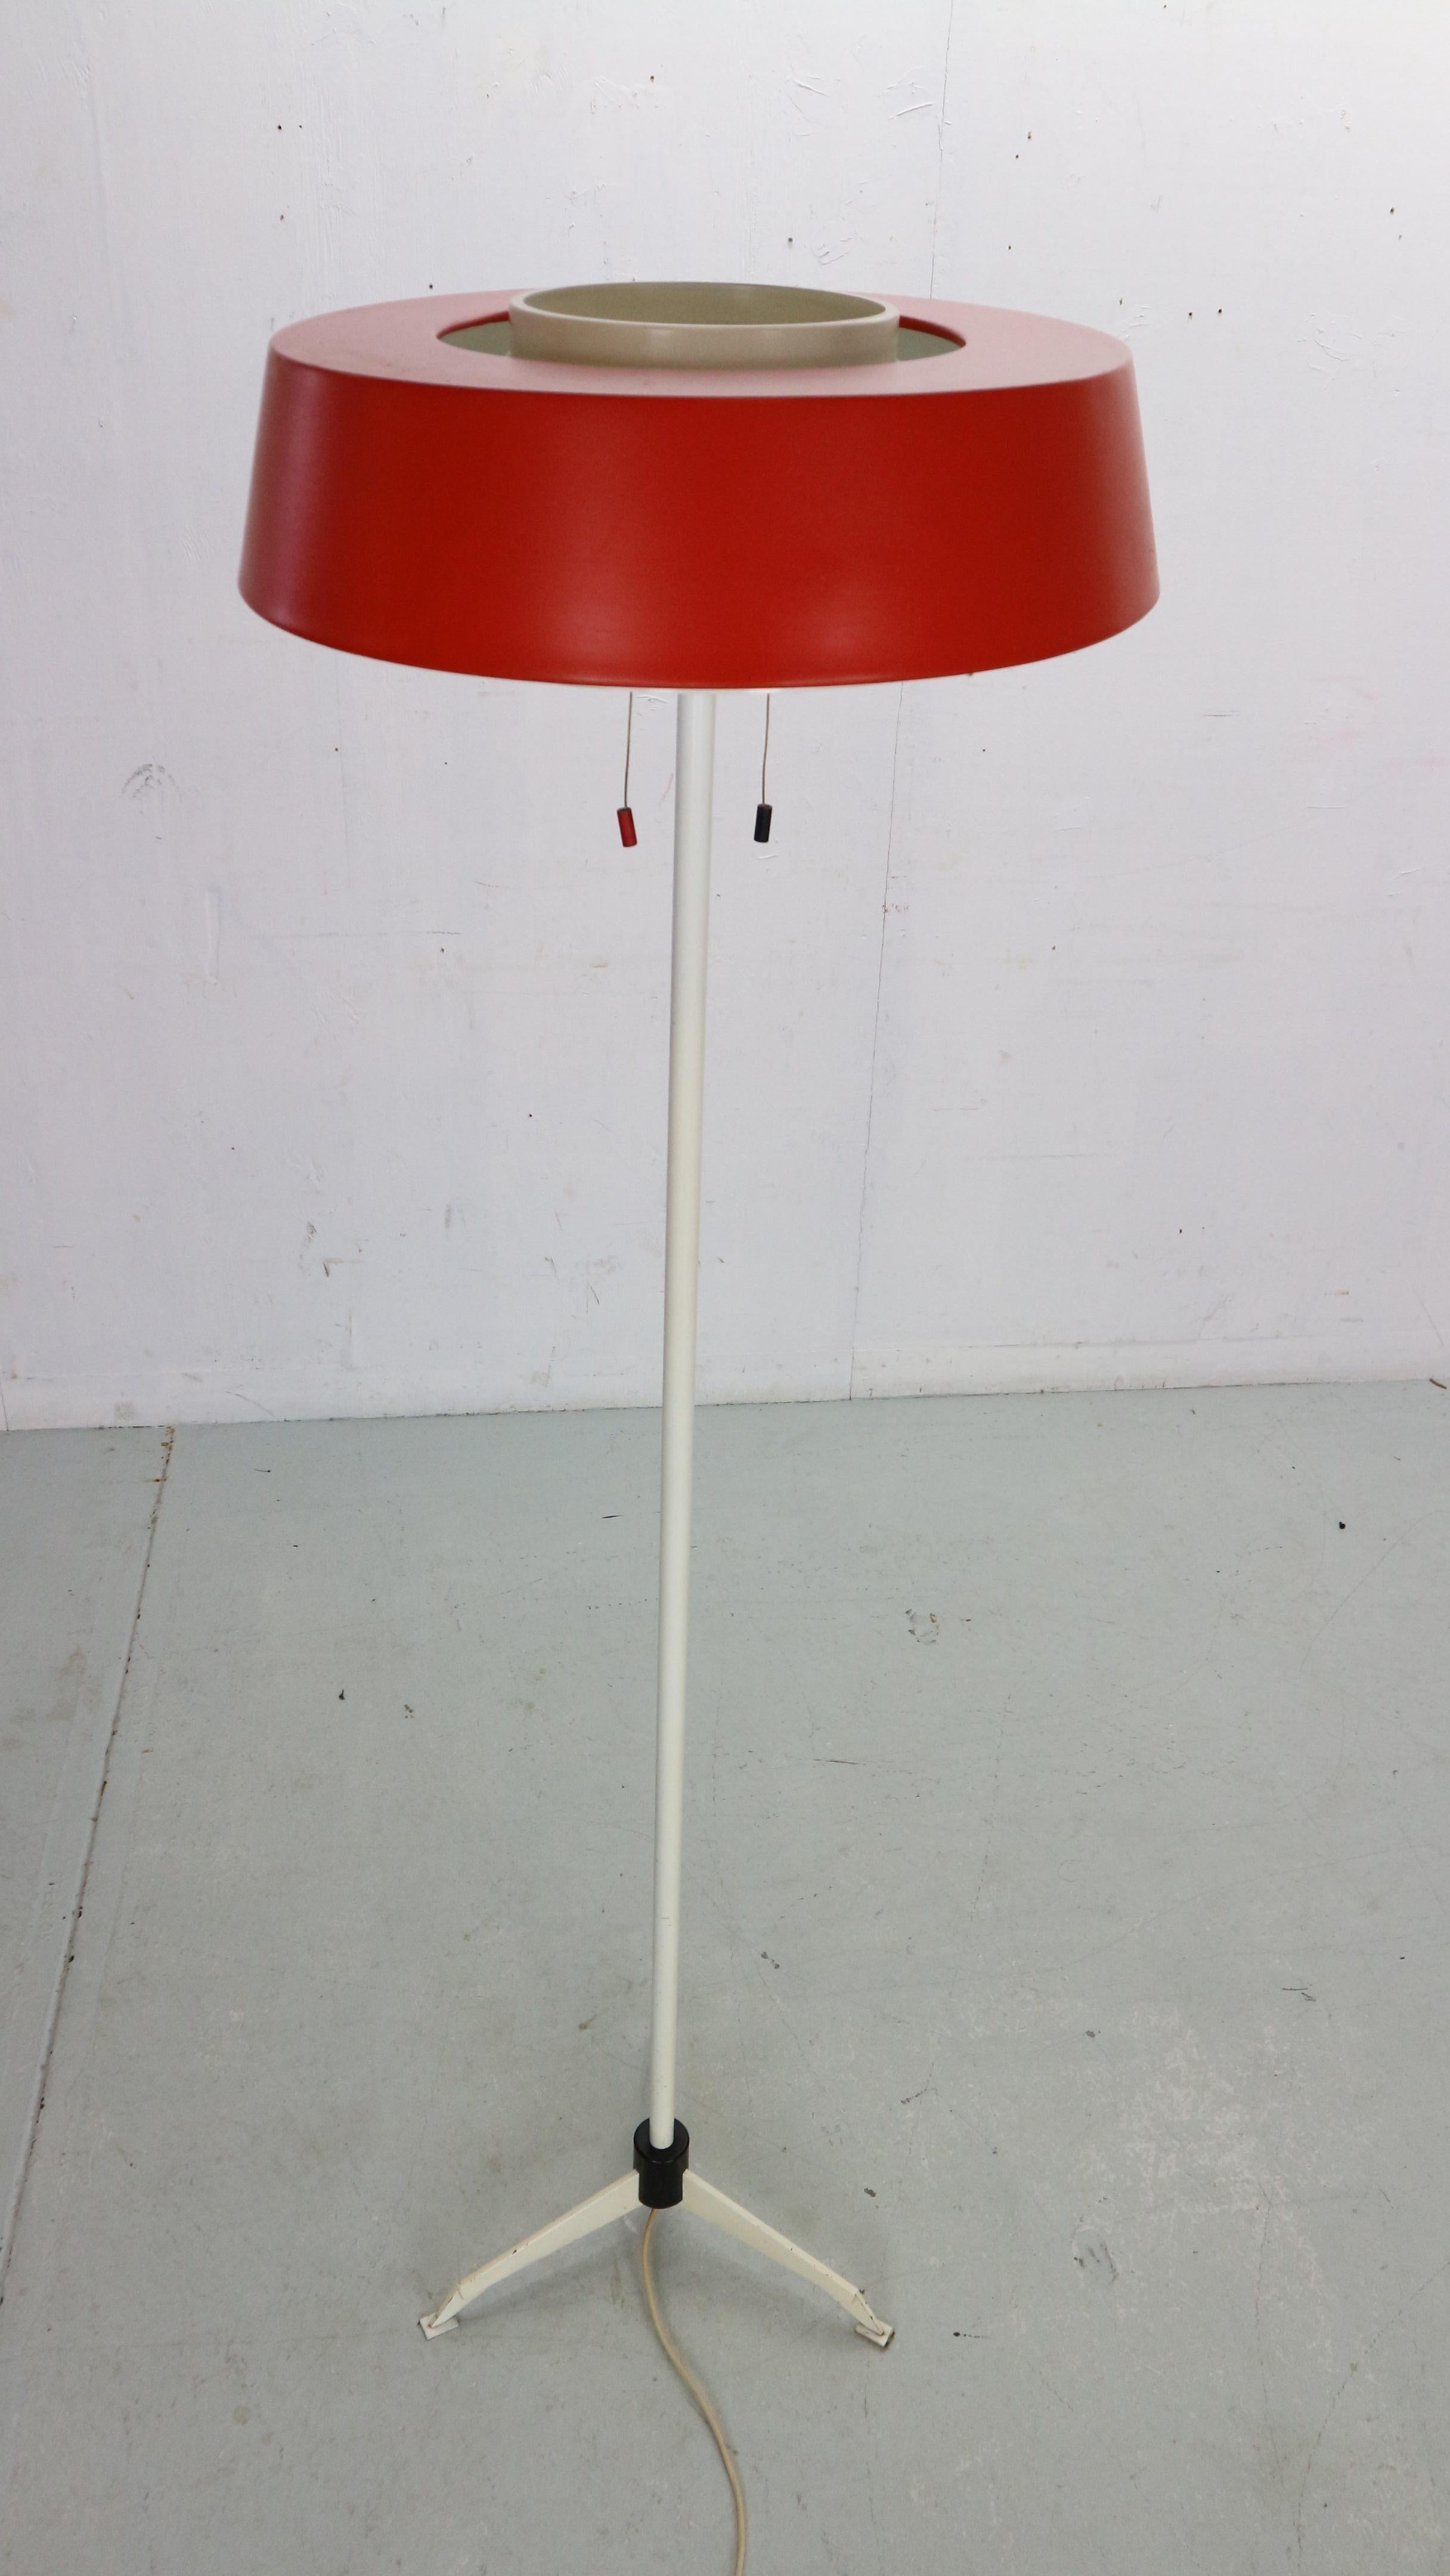 Fantastic floor lamp model ST 7128 designed by Niek Hiemstra and manufactured by Hiemstra Evolux, The Netherlands 1950. Hiemstra Evolux was a progressive design company located in Amsterdam and founded by Hiemstra & Evenblij in 1934. After his